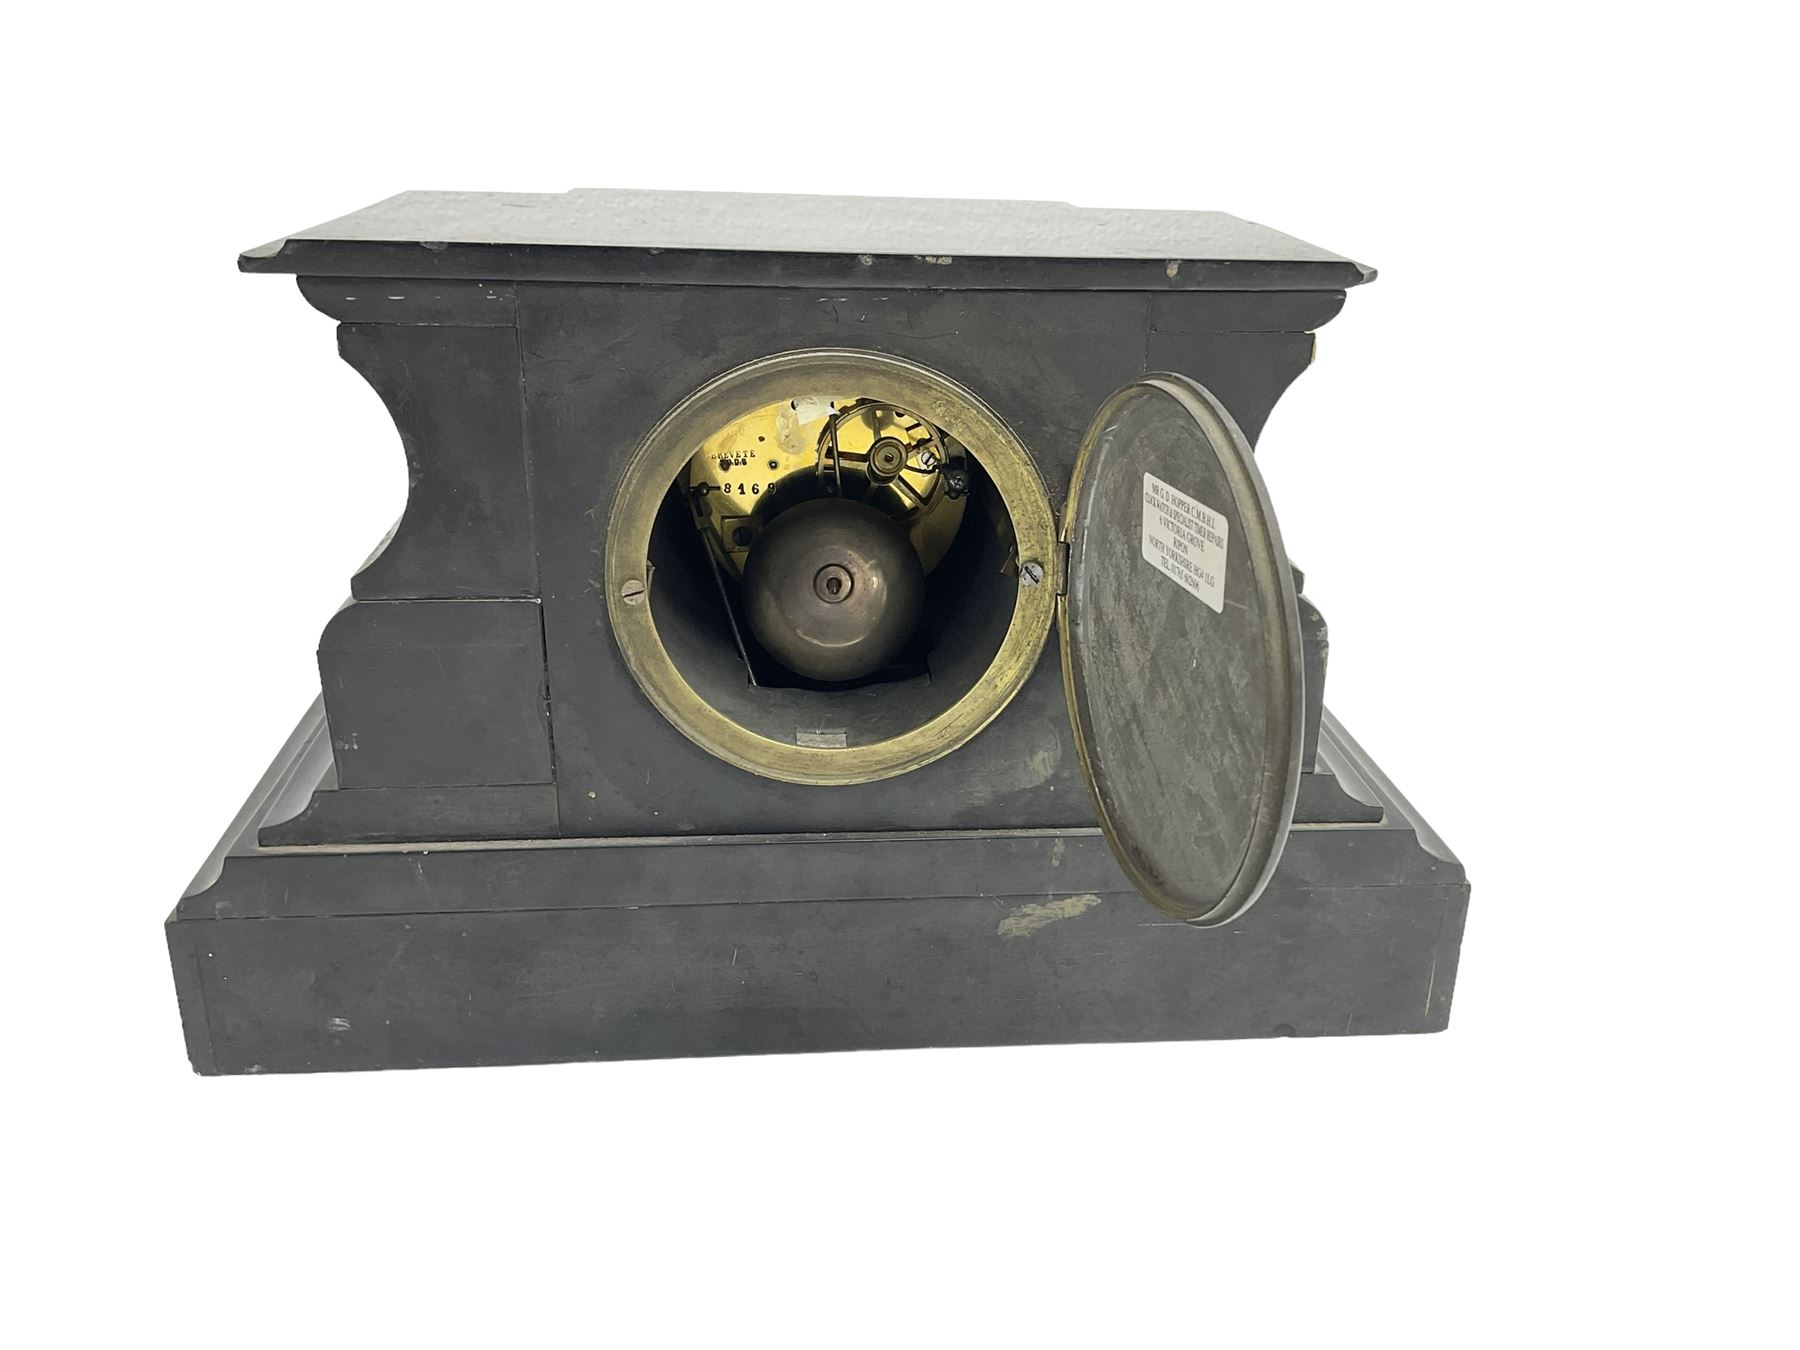 French - 19th century Belgium slate mantle clock with an 8-day Parisian movement - Image 4 of 4